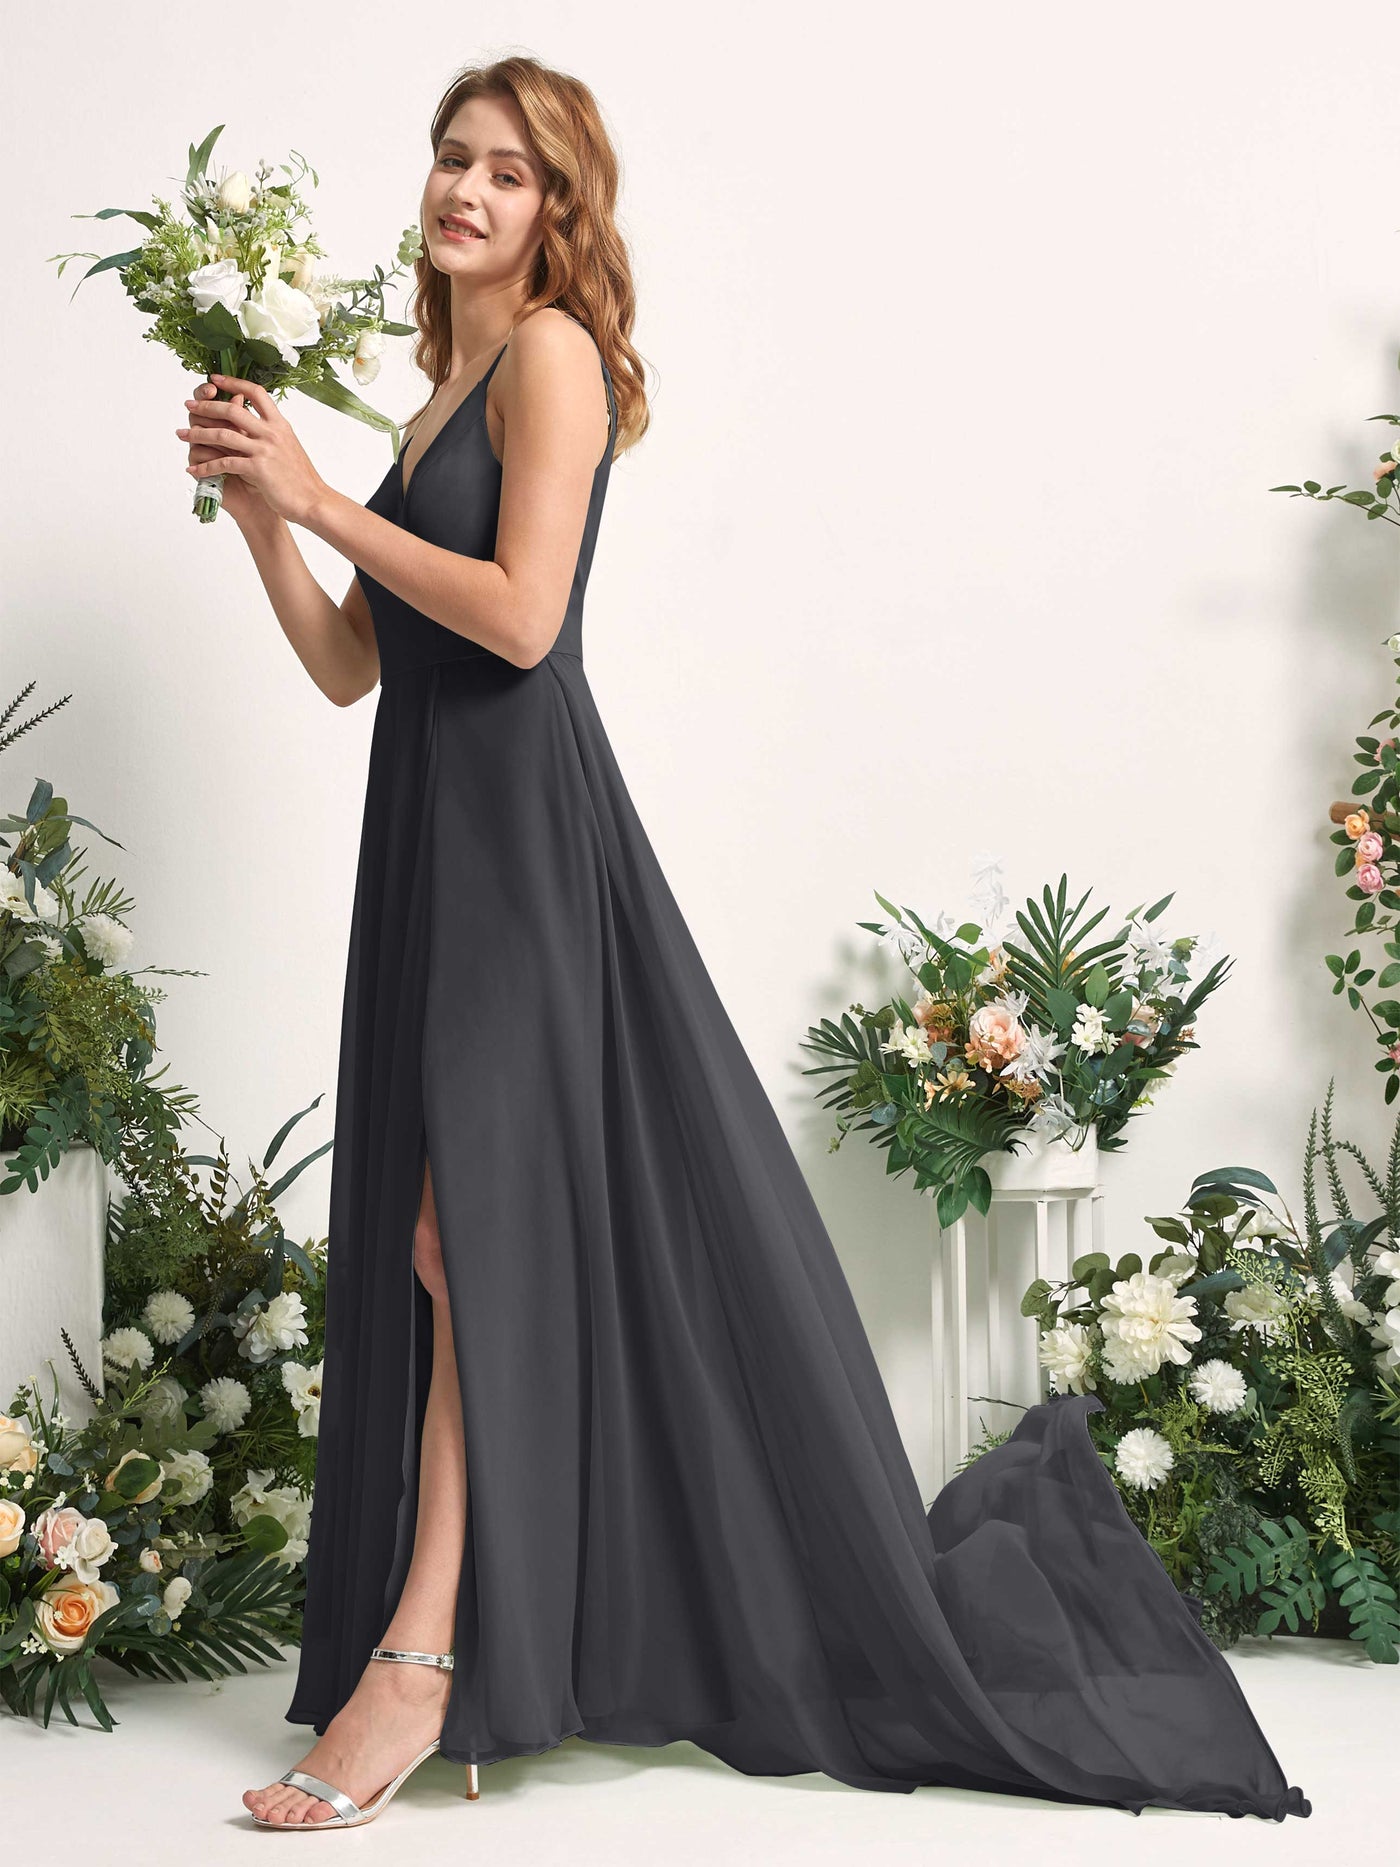 Bridesmaid Dress A-line Chiffon Spaghetti-straps Full Length Sleeveless Wedding Party Dress - Pewter (81227738)#color_pewter